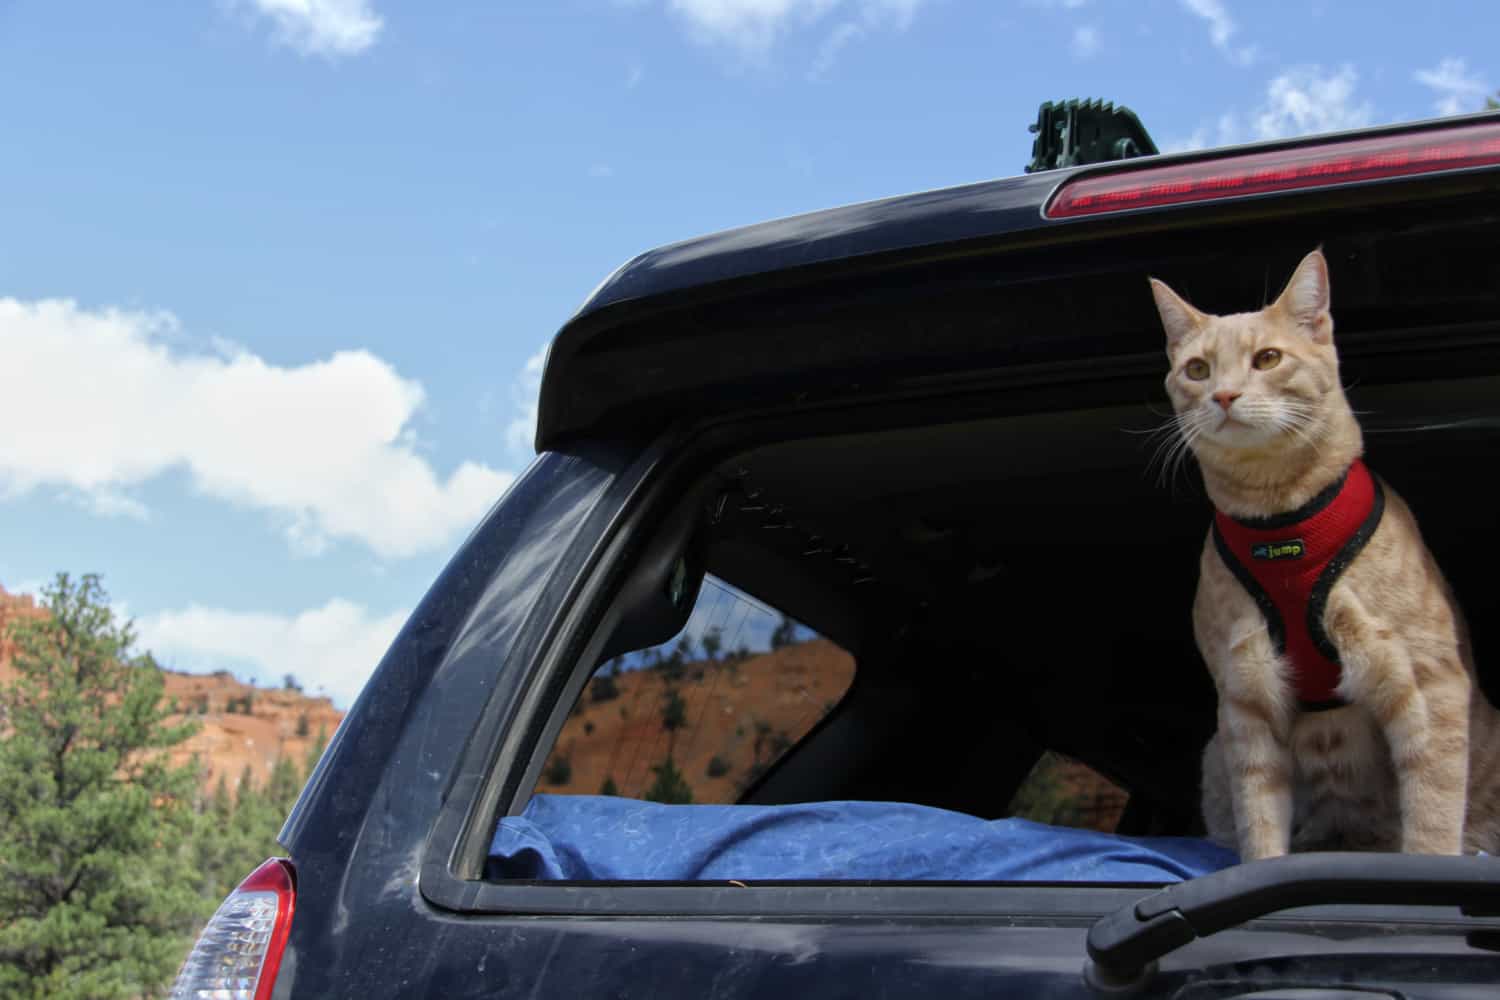 cat tips road trip with cat cat travel your cat tip cat make a cat traveling with a cat in a car taking a cat on a road trip safe foods for cats road trip with cat litter box tips for traveling with a cat cat have cat get cats in a car car trip with cat best cat carrier for road trip litter box tips foods that are safe for cats cats for cars taking your cat on a road trip best food for your cat traveling with your cat cat litter tips find your cat tips for road trips with cats for your cat cat carrier for road trip tips cat tips for getting a cat getting cat in carrier give cat cats and road trips best cat food for your cat cat carrier for car trip cat litter box tips road trip cat carrier taking cats on a road trip cat time cat food the cat the box do you cat tips for traveling with a cat in the car your the cats have you the cat litter box for road trip tips for having a cat foods cat can have cat food tips cat road trip litter box this is your cat give a cat your cat is be your cat give the cat cat cat litter box cat can can taking cat in car food to make for cats you are the best cat best food to give your cat cat in cat carrier your a cat the travel cat make your cat cat carrier for car with litter box the cat cat cat tips to get cat in carrier cats and traveling in cars tips for cat litter box road trip cat litter box taking a cat in the car cat names cat time cat microchip picture cat cat is cat get a cat cat can cat in the cat cat and cat images cat cat help help cat 10 cat cat road cat has if a cat cat trip cat & cat names to name your cat road cat if cat names for your cat a cat can cat on cat get the cat cat likes your kitty cat in cat cat on the road take cat if i was a cat i like your cat cat will kitty tips best products for cats will a cat cat is good cat and the cat microchip your cat get cat microchipped know your cat cats to be microchipped have cat if your cat if you have a cat do cats like road trips do you know cat cat by cat names to give your cat get kitty cat carrier for travel in car your cat name good names to name your cat tips for car travel with cats tips for traveling with cats in a car cat with a cat our cat cat litter best cat tips cat carrier tips cat and can food you can make for your cat kitty litter tips cat names cat take your cat traveling in the car with a cat car trip with a cat tips for cats in cars traveling with a cat tips tips on getting a cat tips for litter box foods you can give your cat do this to your cat litter tips traveling with a cat in car travel cat cat carrier cat tips road trip with cat your cat cat can tip cat traveling with a cat in a car road trip with cat litter box taking a cat on a road trip cat have cat get tips for traveling with a cat litter box tips car trip with cat cat litter tips best cat carrier for road trip taking your cat on a road trip cat carrier for car trip tips for road trips with cats cat carrier for road trip cat litter box tips tips cat tips for getting a cat cats and road trips tips for traveling with a cat in the car litter box for road trip road trip cat carrier cat road trip litter box taking cats on a road trip tips for car travel with cats make your cat tips for having a cat tips for traveling with cats in a car tips to get cat in carrier cats and traveling in cars tips for cat litter box road trip cat litter box traveling in the car with a cat car trip with a cat tips for cats in cars best cat tips cat carrier tips tips on getting a cat tips for litter box litter tips traveling with a cat in car traveling with a cat tips cat a cat traveling with cats in car long distance travel litter box for car get cat best cat carrier for long distance car travel cat carrier for long car trips cat carriers for car travel best cat carriers for car travel best cat carrier for cross country trip long distance travel with cats cat car travel litter box long road trip with cat best cat carrier for long car trips long car trip with cat litter box for car travel cat travel carrier for car long distance cat carrier cat carrier for long distance travel cat carriers for long distance car travel taking my cat on a road trip taking cats on long car journeys tips for taking cats on long car trips best cat carriers for long road trips long distance road trip with cats long car journey with cat cat long car journey best cat carriers for long distance travel cross country road trip with cat long distance travel with cats in car tips for traveling long distance with a cat taking a cat on a long road trip taking a cat on a long car journey cat long distance car trip long trips with cats cats on long road trips long trip with cat long road trip with a cat cat carrier long road trips traveling in car with cats long distance cats on long car journeys best cat carrier for long car travel long distance travel with a cat best cat carrier for car trips prepare cat for road trip traveling long distance with cats in car long car travel with cats the best cat carrier for travel in a car cat carriers for long trips car journey with cat road trip with my cat traveling cross country with a cat in a car travels with my cat travel long distance with cat in car take cat on long car trip travel litter box car traveling by car with a cat long distance road trip with two cats tips to prepare for cat traveling long distance in a car with a cat traveling with your cat in a car taking cats on car trips traveling in the car with cats tips for traveling long distance with cats traveling with cats long distance in car tips for getting cat in carrier long journey cat carrier road trip with cat travel litter box for car your cat traveling with a cat in a car cat can taking a cat on a road trip cat car travel litter box cat carriers for car travel road trip with cat litter box best cat carriers for car travel cat have long road trip with cat cat carrier for long car trips litter box for car travel cat travel carrier for car long car trip with cat car trip with cat best cat carrier for long car trips taking your cat on a road trip cat carrier for car trip best cat carrier for road trip taking my cat on a road trip cat carrier for road trip travel cat cat travel carrier cat animal cat car find my cat cat car carrier can cats travel cat litter box cat driving car cat in car car cats cat is cat pet carriers for cats make a cat cat in the cat cats can best cat carrier for car carrier cat create a cat cat and cat cat cats cat travel box cat trip travel with my cat cat on car does cat cat travel carrier with litter box cats on a car cat road cat and dog road trip cat car carrier with litter box if cat cat animal hospital best cat travel carrier my cat my cat cat has if a cat it is my cat traveling with your cat cars for cats pet your cat feeding your cat cat & cat cat on vacation cat is a animal road cat cats and cars a cat can cat on my car cat on cat best pet carrier for cats teach cat to use litter box cat using litter box take a cat long drive with cat make your own cat cat on the road take cat if i was a cat go to cat find your cat for your cat taking cat to vet traveling with a cat litter box places to take your cat the cat is on the car cats and travel my own cat cat will if my cat the cat is in the car my cat pets me to my cat taking cat on vacation know your cat cat is an animal go to cat cat cat need carrier for 2 cats a cat carrier make your own cat litter trip the dog pet carrier for 2 cats will a cat if your cat there is a cat on my car cats on the road make your own litter box if you have a cat take your cat to the vet day cat and the cat petting your cat will the cat create your own cat cat in a cat cat on the car time travelling cat a cat car your pet cat cat going taking your cat on vacation cat cat car cat visit times to feed cat do you cat best place to pet cat best carriers for cats your the cats cat travel medication dog cat carrier cat does teach cat cat carriers for 2 cats road trip road trip planner the road trip road trip ideas best road trip planner car trip travel tips travel planner things to do on a road trip road trip tips travel plan road trip with dog trip planner map things to take on a road trip best road trip road trip map road trip places road trip map planner trip ideas blog travel car trip planner things to do on a road trip in the car map a trip best trip planner plan your road trip trip places dog friendly road trips road trip with dog planner road trip with friends trip planner road trip things you need for a road trip places to go on a road trip travel tips and tricks best places to road trip a road trip car road trip take a road trip best places to go on a road trip go on a road trip pet friendly road trip planner road trip blog travel planner map going on a road trip trip blog dog friendly road trip planner travel by road travel trip planner best road trip ideas plan a trip for me road trip advice road trip to places to take a road trip best road trip map best travel planner things for a road trip road map planner things to do on a road trip with friends road trip travel map your road trip plan your travel help me plan a trip go pet friendly road trip needs road travel planner road trips to take help me plan a road trip taking dog on road trip road trip travel planner travel tricks help planning a trip road to trip things needed for a road trip road trip from the travel planner trip your plan best places to road trip to on the road trip best places to take a road trip road trip tips and tricks the best road trip best places to road trip with friends plan your trip map best road trips with dogs trip in car plan road help planning a road trip things to do on a car trip on road trip road trip with your dog do a road trip planning a trip with friends pet friendly road trip best things for a road trip best road trip tips i need a road trip best road trip dogs road travel tips best things to do on a road trip best things to take on a road trip best things for road trips best road trip map planner road trip with pets road trip with you road trip road trip tricks and trips plan of travel a travel plan road travelling car road trip planner i plan to travel tips for planning a road trip plan a trip to road trip by car pet friendly trip planner map a trip by car road trips are the best car travel planner car trip ideas car and trips plan a road trip for me travel planning tips things to do in road trip tips for taking dog on road trip best road trips to take road trip with best places to go on road trip things to plan for a trip road trips to go on trips planned for you trip tricks go for a road trip road map for travel traveling on the road places to go on a road trip with friends best places to go on a road trip with friends by road travel road trip car ideas i need help planning a trip road trip help go to road trip best travel map planner road trips to go on with friends road trip travel tips travel with a plan road trip tricks go pet friendly road trip planner places to road trip with friends best dog road trips best dog friendly road trips trip planning tips best tips for road trips car trips with dogs things to take with you on a road trip for a road trip a car of travelers road trips to take with your dog things to take for a road trip trips to plan places to plan a trip best place to plan a trip road trip is car trip tips best road trips to take with your dog road trip car tips places for a road trip plan me a road trip to go on a road trip things to take for road trip dogs and road trips best road trips with your dog road trip with car things needed on a road trip places to go on a road trip to things i need for a road trip need a road trip about your trip about road trip best road trips for dogs tips for taking dogs on road trips travel planner ideas need help planning a trip best places to take a road trip to road trip ideas with friends to plan a trip things to plan for a road trip road trip for dogs road trip things to do in car road travel map trips to plan with friends things to do road trip planner trip on road map planner for trips road trip a road trip trip the travel plan best places to take a road trip with friends things to take in a road trip road trip road friends on a road trip best map for travel planning best road trips from best places to road trip with your dog planning on a trip dog friendly trip planner planning a road trip with a dog road trip ideas with dog places to go to on a road trip places to go in a road trip road trip travellers best road trip advice best trip planning map plan for the trip road trip in a car maps for traveling by car things you need in your car for a road trip help me to plan a trip road trip with pets planner plan your car trip taking a road trip with your dog road trip on travel planner blog travel planner with map things to do in a car road trip roads to travel dog on a road trip tips to plan a trip planning road trip with dog road trips to take with friends trip road trip road trip to do planner road best places to do a road trip travel by plan travel plan it for road trip best car trip planner planning to go travelling trips that are planned for you things to take in the car on a road trip road trip travel blog by road trip travel planning help plan your road trip map best friend road trips tips and tricks travel plan trip to road trip me tips for going on a road trip pet trip planner things to do for a road trip the best trip planner best car trip road trip planner with pets take a road trip to planning a trip tips dog friendly road trip ideas home to go pet friendly road trip it trip planner ideas road trip with me planning a road trip with friends trip planning ideas trip it travel planner things to take on a car trip need help planning a road trip best road trip roads things to do on your road trip i need to plan a trip trip trip planner on the road road trip in need of a road trip friend road trip ideas tips and tricks for road trips tips for taking a road trip plan trip on a map traveling with cats in car long distance travel cat cat carrier cat car cat car carrier best cat carrier for car road trip with cat travel litter box for car traveling with a cat in a car travel cat carrier travel cat litter box moving with cats best cat carrier for long distance car travel cat travel cage your cat cat travel box cat carriers for car travel best cat carriers for car travel get cat cat car carrier with litter box cat car travel litter box traveling long distance with a cat long car rides with cats road trip with cat litter box cat carrier for long car trips traveling litter box taking a cat on a road trip long road trip with cat cat trip litter box for car travel cat travel carrier for car cat and dog road trip cat cage for car cats and car rides long distance cat carrier moving with cats in car best cat carrier for long car trips moving long distance with cats best cat travel carrier car trip with cat cat carriers for long distance car travel best cat carrier for road trip car safe cat carrier car for cats long car trip with cat cat carrier for car trip cat carrier for long distance travel cat car ride cats and long car rides taking your cat on a road trip taking cats on long car rides car cat litter box best cat harness for car travel cat carrier for road trip best cat carriers for long road trips best cat carriers for long distance travel cat carrier for car rides best long distance cat carrier cats on car rides best pet carrier for car travel cat harness for car travel long distance road trip with cats road trip cat carrier moving with a cat in a car cat car travel cage cats and road trips cat cage for car travel long distance travel with cats in car carrier for cats in car taking cats on a road trip cats and traveling in cars cat litter for travel best cat carrier for long car travel taking a cat on a long road trip the best cat carrier for travel in a car taking cat in car cat car travel carrier with litter box car carrier cat best cat carrier for car trips cat carriers for long car rides litter box for road trip cat long distance car trip taking cats on car rides long trips with cats cat carrier for long road trips cats on long road trips long trip with cat long road trip with a cat cat road trip litter box traveling long distance with cats in car cat litter travel long car travel with cats cat long distance travel cage road trip with cat and dog traveling in car with cats long distance cat carriers for long trips long distance car ride with cats safe cat carrier for car taking cats in the car long distance travel with a cat road trip cat litter box taking a cat in the car dog and cat road trip travel long distance with cat in car taking a cat on a long car ride long car ride with a cat traveling in the car with a cat moving cats long distance car car trip with a cat travel litter box car traveling by car with a cat long distance traveling with a cat in car traveling long distance in a car with a cat cat car ride on cat dog road trip take cat on long car trip traveling with cats long distance in car traveling with your cat in a car taking cats on car trips traveling in the car with cats road trip the road trip road trip podcasts go on a road trip go trips going on a road trip a road trip road trip journal road trip video on a road trip road trip to trips to go go on trips road to trip road trip from on the road trip on road trip podcasts for a road trip road trip company trip on the road road trip in road trip road trip go for a road trip go to road trip podcasts for road trip road trip with road trips to go on to go on a road trip road and trip podcasts about road trips road the trip road a trip road trip is road trip business about road trip trip on road road trip a road trip trip road trip road road trip on road trip i trip road trip for road trip road trip pro by road trip cat backpack cat tips travel cat cat leashes road trip with cat your cat cat travel backpack shop cat travel cat harness harness cat your cat backpack best cat backpacks cat you cat road the traveler cat backpack cat trip road cat cat backpack travel cat on the road for your cat cat harness backpack cat going know your cat backpack for your cat cat and you best cat travel backpack travel with your cat travel cat shop tips for road trips with cats backpack with cat this is your cat your cat is be your cat cat backpack with harness your a cat cats and road trips should cat cat harness with backpack cat harness on cat going cat cat in cat backpack cat travel pack the backpack cat cat travel back pack get your cat your cat backpack harness your cat back pack cat harness and backpack and your cat a backpack for your cat backpacking with your cat travel cat cat tips road trip with cat your cat shop cat cat you cat trip travel cat shop tips for road trips with cats cat and you cats and road trips travel litter box traveling with cats in car long distance cat travel carrier cat travel bag cat car carrier best cat carrier travel litter box for car traveling with a cat in a car things to know before getting a cat travel cat litter box best cat carrier for car best cat carrier for long distance car travel cat carrier with litter box things to know about cats you are a cat cat travel box things you need for a cat get cat cat car carrier with litter box tips for traveling with a cat taking a cat on a road trip cat car travel litter box traveling long distance with a cat cat carriers for car travel you are cat road trip with cat litter box best cat carriers for car travel cat carrier for long car trips cat travel carrier with litter box long road trip with cat things cats need litter box for car travel cat travel carrier for car cat on vacation you can do it cat long distance cat carrier travel litter traveling with your cat best cat travel carrier long car trip with cat car trip with cat travel cat litter best cat carrier for road trip a cat carrier best cat carrier for long car trips traveling with a cat litter box car cat litter box cat carrier for car trip cat carriers for long distance car travel cat for you best travel litter box taking cat on vacation cat carrier for long distance travel things you need to know before getting a cat cat travel bag with litter box cat need taking your cat on a road trip the best cat carrier do cats need road trip with cat advice cat carrier for road trip things you need for cats long distance road trip with cats best cat carriers for long distance travel things you need to know about cats tips for taking cats on long car trips best long distance cat carrier tips for traveling with a cat in the car things to do before getting a cat things i need for a cat things you need before getting a cat long distance travel with cats in car best cat carriers for long road trips cats and travel cat litter for travel long distance cat carrier with litter box things needed for cat taking cat in car road trip cat carrier tips for traveling long distance with a cat best cat litter box for travel before you get a cat tips for getting a cat taking your cat on vacation do you cat things you need for your cat you are the cat best travel bag for cats the travel cat travel carrier for cat with litter box litter box for road trip cat long distance car trip do you know cat carrier for cats in car things to know before you get a cat places you can take your cat taking cats on a road trip traveling long distance with cats in car cats to you cats and traveling in cars cat carrier long road trips taking cats in the car long car travel with cats best cat carrier for long car travel taking a cat on a long road trip you need a cat the best cat carrier for travel in a car best travel cat litter box you are the best cat cat with you cat things to know car carrier cat best cat carrier for car trips you are the cats taking a cat in the car best cat for traveling long trips with cats cats on long road trips long trip with cat tips for car travel with cats litter travel long road trip with a cat cat road trip litter box travel for cats best cat travel bag best cat litter for travel tips for traveling with cats in a car do cats know you best cat for you things to know about a cat things to know about getting a cat cat things you need long travel with cat cat tips road trip with cat travel cat your cat traveling with a cat in a car get cat taking a cat on a road trip tips for traveling with a cat cat trip traveling with your cat car trip with cat taking your cat on a road trip tips for road trips with cats tips for getting a cat do you cat tips for traveling with a cat in the car taking your cat on vacation cats and road trips tips for car travel with cats taking cats on a road trip cats and traveling in cars tips for traveling with cats in a car taking cat in car the travel cat taking a cat in the car travel for cats cat adoption cat car cat shelter cat home cat care cat dogs cat in car find my cat cat care tips cat cars petfinder cat cat can taking care of a cat cat cats tip cat cat on car help cat if a cat cat road cat search videos for your cat cat and dog road trip bringing a cat home cats and car rides my cat my cat cat has cat videos for your cat car and dog cat have my home cat pet your cat cat get cats on a car go to cat travel with my cat road cat if cat cat find adopting a cat tips it is my cat pet and cat cat on the road cat vacation care car for cats if i was a cat for your cat cat will cat on my car if my cat cat and car give cat to my cat find a home for my cat go to cat cat taking my cat on a road trip if your cat cat car ride tips find your cat help my cat petting your cat cats on car rides cat on the car tips cat pet adoption cats cat going car rides with cats animal shelter cat adoption your the cats caring for your cat this is your cat your cat is be your cat if you have a cat a cat car cat for a car for cats video your pet cat cat cat car pet for cat take my cat have you the cat car to cat tips for having a cat my cat i give a cat a home getting a dog with a cat cat is a pet getting a cat with a dog bringing a cat home to a dog give a cat give the cat cat can can my cat home road trip with cat and dog take care of your cat cat riding car get my cat my cat a getting a cat for my dog your a cat pet cat care tips i my cat the cat cat cat cat pet tips bringing your cat on vacation tips for cats in cars pet of cat cat of car a cat in a car tips for taking care of a cat dog and cat road trip taking cats on car rides take your cat traveling in the car with a cat pet and the cat car trip with a cat car for a cat pet shelter cat road trip with my cat tips for taking care of cats cat to car tips on getting a cat give your cat for adoption do this to your cat cat dog road trip traveling with a cat in car traveling with a cat tips traveling with your cat in a car taking cats on car trips traveling in the car with cats adopting a cat from a shelter tips cat tips road trip with cat your cat cat can tip cat traveling with a cat in a car taking a cat on a road trip help cat cat road tips for traveling with a cat cat has if a cat cat have cat trip cat get road cat if cat car trip with cat cat on the road if i was a cat taking your cat on a road trip cat will traveling with your cat find your cat tips for road trips with cats for your cat tips cat tips for getting a cat give cat cats and road trips if your cat if you have a cat taking cats on a road trip do you cat tips for traveling with a cat in the car your the cats have you the cat tips for having a cat this is your cat give a cat your cat is be your cat give the cat cat can can taking cat in car your a cat the travel cat tips for car travel with cats the cat cat cat tips for traveling with cats in a car cats and traveling in cars taking a cat in the car take your cat traveling in the car with a cat car trip with a cat tips for cats in cars traveling with a cat tips tips on getting a cat do this to your cat traveling with a cat in car cat names cat time cat microchip picture cat cat is cat cat travel get a cat cat in the cat cat and cat images cat cat help make a cat 10 cat safe foods for cats road trip with cat litter box cat & cat names to name your cat names for your cat a cat can cat on cat get the cat cats in a car cat likes your kitty cat in cat best cat carrier for road trip litter box tips take cat foods that are safe for cats cats for cars i like your cat best food for your cat cat litter tips kitty tips best products for cats will a cat cat is good cat and the cat microchip your cat cat carrier for road trip getting cat in carrier get cat microchipped know your cat cats to be microchipped best cat food for your cat have cat cat carrier for car trip do cats like road trips cat litter box tips road trip cat carrier cat time cat food the cat the box litter box for road trip do you know cat foods cat can have cat food tips cat by cat cat road trip litter box names to give your cat cat cat litter box get kitty cat carrier for travel in car your cat name food to make for cats you are the best cat best food to give your cat cat in cat carrier good names to name your cat make your cat cat carrier for car with litter box cat with a cat our cat cat litter best cat tips cat carrier tips cat and can tips to get cat in carrier tips for cat litter box food you can make for your cat road trip cat litter box kitty litter tips cat names cat tips for litter box foods you can give your cat litter tips travel cat cat carrier cat tips best cat road trip with cat traveling with cats in car long distance find my cat relax my cat anxious cat cat travel your cat calm cat create a cat tip cat my cat is my best friend travel litter box for car best way to pet a cat make a cat traveling with a cat in a car get cat things to do with your cat cat guide cat safety cat down best cat carrier for long distance car travel safe foods for cats taking a cat on a road trip long car rides with cats road trip with cat litter box cat have cat carrier for long car trips cat carriers for car travel best cat carriers for car travel calm cats down best way to prepare for cat cat get tips for traveling with a cat long distance travel with cats travel with my cat cat and dog road trip cat car travel litter box long road trip with cat my cat my cat cat times it is my cat cats in a car calm my cat cat using litter box pet your cat list cat keeping a cat litter box tips best cat carrier for long car trips go to cat foods that are safe for cats cats for cars cat with down cats and car rides long car trip with cat ways to pet your cat best food for your cat my cat is anxious cat on my car car trip with cat traveling with your cat my cat pets me cat litter tips best cat carrier for road trip litter box for car travel cat travel carrier for car get cat to use litter box cats and long car rides go to cat cat getting cat used to harness taking your cat on a road trip help me find my cat long distance cat carrier things to make for your cat things to get your cat taking cats on long car rides keep calm cat cat food go find your cat best way to get cat in carrier for your cat petting your cat taking your cat camping cat carrier for long distance travel ways to calm a cat cat in hotel cat going calming cats for travel getting cat in carrier cat carriers for long distance car travel calm your cat cat use to get food give cat cat road trip essentials to my cat cats riding in cars things to get for your cat taking my cat on a road trip getting a cat used to a harness relax your cat camping with your cat taking cats on long car journeys things to do with my cat tips for taking cats on long car trips tips for road trips with cats giving cat food to dogs best cat food for your cat best way to calm a cat road trip with cat advice cat carrier for road trip cat car ride tips things for your cat best cat carriers for long road trips things to make for cats cat carrier for car trip long distance cat carrier with litter box giving dogs cat food keep the cat help my cat things your cat needs my friends cat long distance road trip with cats best way to get a cat cat litter box tips my cat hotel relax cats giving dog food to cats long car journey with cat cat time cat food your pet cat tips cat get me a cat best way to travel with a cat in a car tips for getting a cat the cat the box tips for long car rides with cats do you cat things you need for your cat my cat friend keep cat calm in car best way to pet your cat cat long car journey best cat carriers for long distance travel cats and road trips your the cats take my cat have you the cat cat on the way calm my cat down long distance travel with cats in car my cat i cat carrier for car rides foods cat can have best way to road trip with cats getting a dog with a cat road trip cat carrier cats on car rides calming an anxious cat taking cats on a road trip getting a cat with a dog this is your cat my best friend is my cat make cat use litter box calming cat carrier your cat is give a cat be your cat give the cat best ways to travel with a cat calm cat carrier cat cat litter box taking a cat on a long road trip cat harness for car travel cat can can things to do to your cat taking cat in car food to make for cats best way to travel with cats in a car you are the best cat getting a dog used to a cat create your cat relaxant for cats taking a cat on a long car journey calm your cat down getting dogs used to cats my cat a litter box for road trip getting a cat for my dog cat long distance car trip things that calm cats down best food to give your cat calm cat in car cat in cat carrier getting cats used to dogs cats on long road trips long trip with cat your a cat the travel cat make your cat tips for traveling with a cat in the car ways to calm your cat ways to calm down a cat my cat needs a friend best way to travel with cats long distance cat carrier for car with litter box my cats are my best friends long road trip with a cat foods i can give my cat i my cat cat road trip litter box the cat cat cat ways to find your cat tips for having a cat getting your cat used to a harness cat carrier long road trips keeping cat as a pet cat food tips keep calm and cat road trip with cat and dog get cat used to carrier cat safety tips tips for traveling long distance with a cat tips to get cat in carrier cats and traveling in cars long distance car ride with cats cats on long car journeys things you can do with your cat tips for cat litter box best cat carrier for long car travel tips for cats on long car rides calming for cats travel cat harness tips long distance travel with a cat best cat carrier for car trips road trip cat litter box taking a cat in the car road trip with cat litter box how to transport a cat by car long distance road trip with cat reddit traveling with a cat in a car how to travel with 2 cats in a car long distance traveling with a cat on a plane traveling with a cat internationally 20 hour car ride with cat